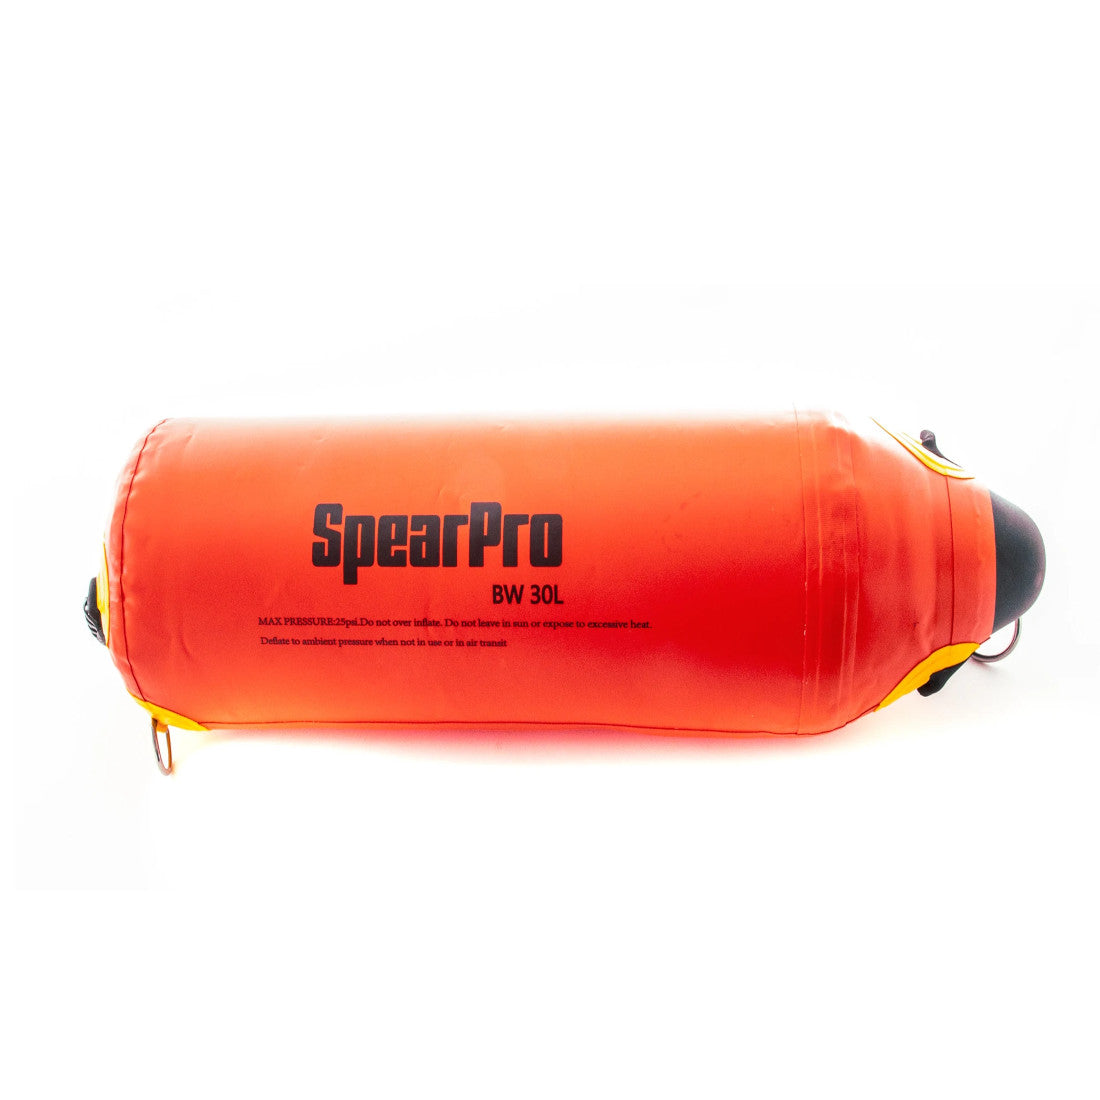 SpearPro Bluewater Spearfishing Float 25psi 15L, 30L, 45L Options - 15L with Flag